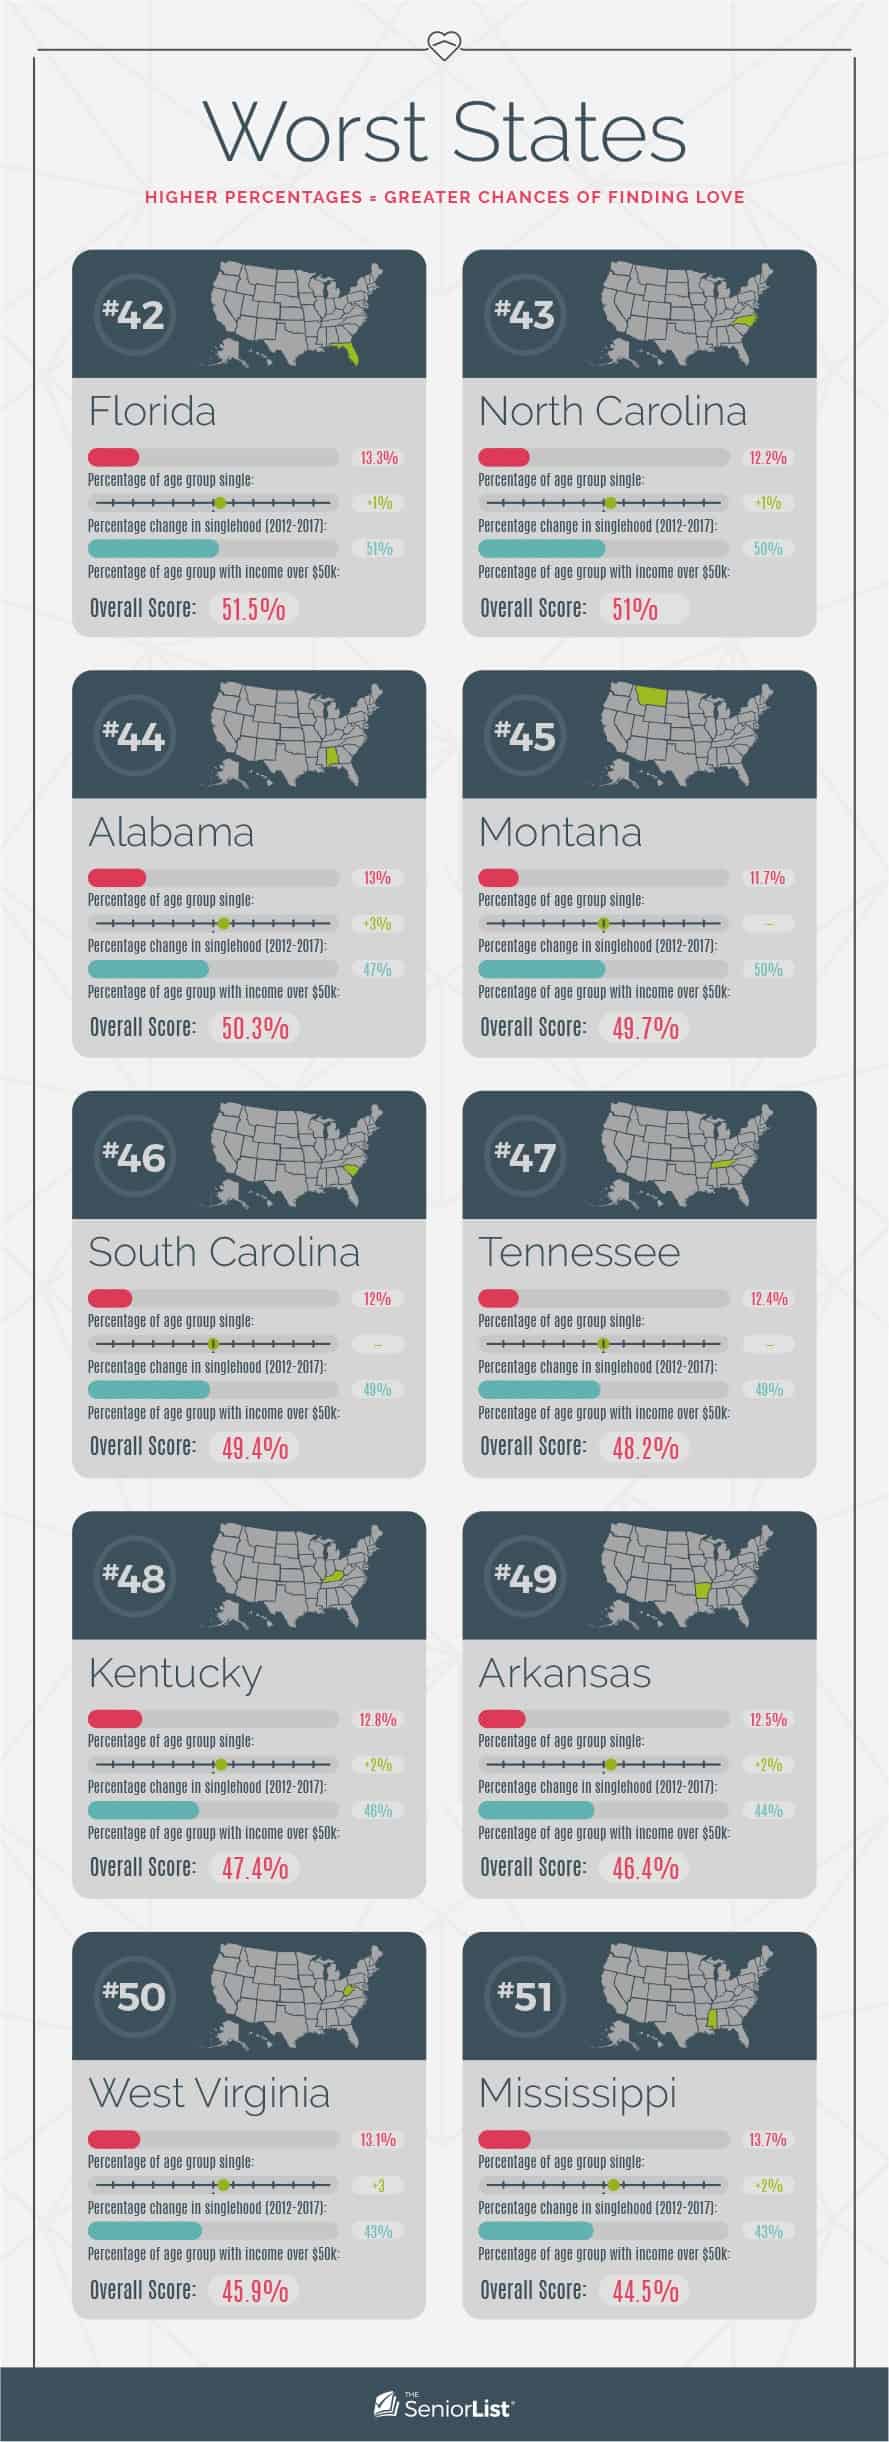 Worst States, HIGHER PERCENTAGES = GREATER CHANCES OF FINDING LOVE, # 42, # 43, Florida, North Carolina, 13.3 %, 12.2 %, Percentage of age group single, Percentage of age group single :, + 1, Percentage change in singlehood ( 2012-2017 ), Percentage change in singlehood ( 2012-2017 ) :, 51 %, 50 %, Percentage of age group with income over $ Overall Score : 51.5 %, Percentage of age group with income over $ Overall Score : 51 %, # 44, # 45, Alabama, Montana, 13 %, 11.7, Percentage of age group, Percentage of age group single :, + 3 %, Percentage change in singlehood ( 2012-2017 ) :, Percentage change in singlehood ( 2012-2017 ) :, 47 %, 50 %, Percentage of age group with income over $ 50k Overall Score : 50.3 %, Percentage of age group with income over $ Overall Score : 49.7 %, # 46, # 47, South Carolina, Tennessee, 1.4 %, Percentage of age group single :, 1 %, Percentage of age group with income over $ Overall Score : 49.4 %, Percentage of age group with income over $ Overall Score : 48.2 %, # 48, # 49, Kentucky, Arkansas, 12.8 %, 12.5 %, Percentage of age group single, Percentage of age group single, + 2 %, Percentage change in singlehood ( 2012-2017 ) :, 46 %, 44 %, Percentage of age group with income over $ Overall Score : 47.4 %, Percentage of age group with income over $ Overall Score : 46.4 %, # 50, # 51, West Virginia, Mississippi, 13.1 %, Percentage of age group single, Percentage of age group single, + 2 %, Percentage change in singlehood ( 2012-2017 ) :, Percentage change in singlehood 2012-2017 ) :, 1 %, Percentage of age group with income over $ Overall Score : 45.9 %, Percentage of age group with income over $ 50k Overall Score : 44.5 %, SeniorList